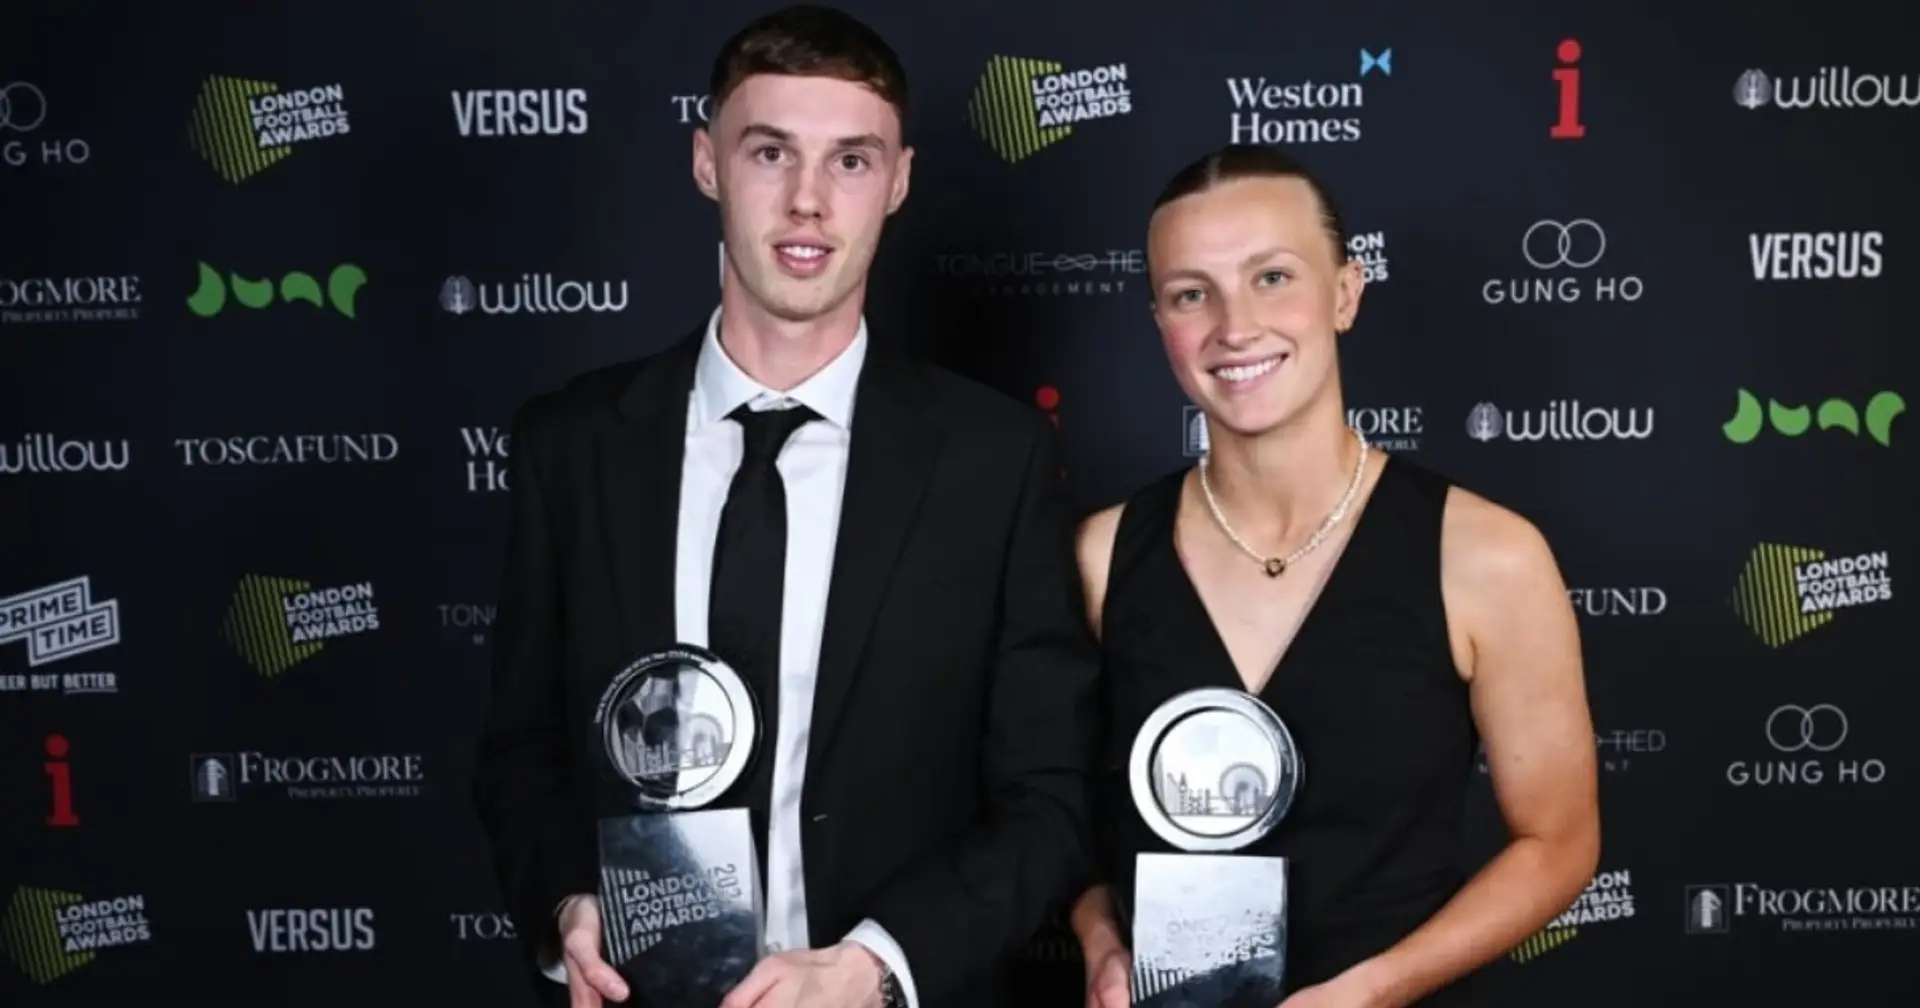 Cole Palmer, Lauren James and Aggie Beever-Jones among winners at London Football Awards